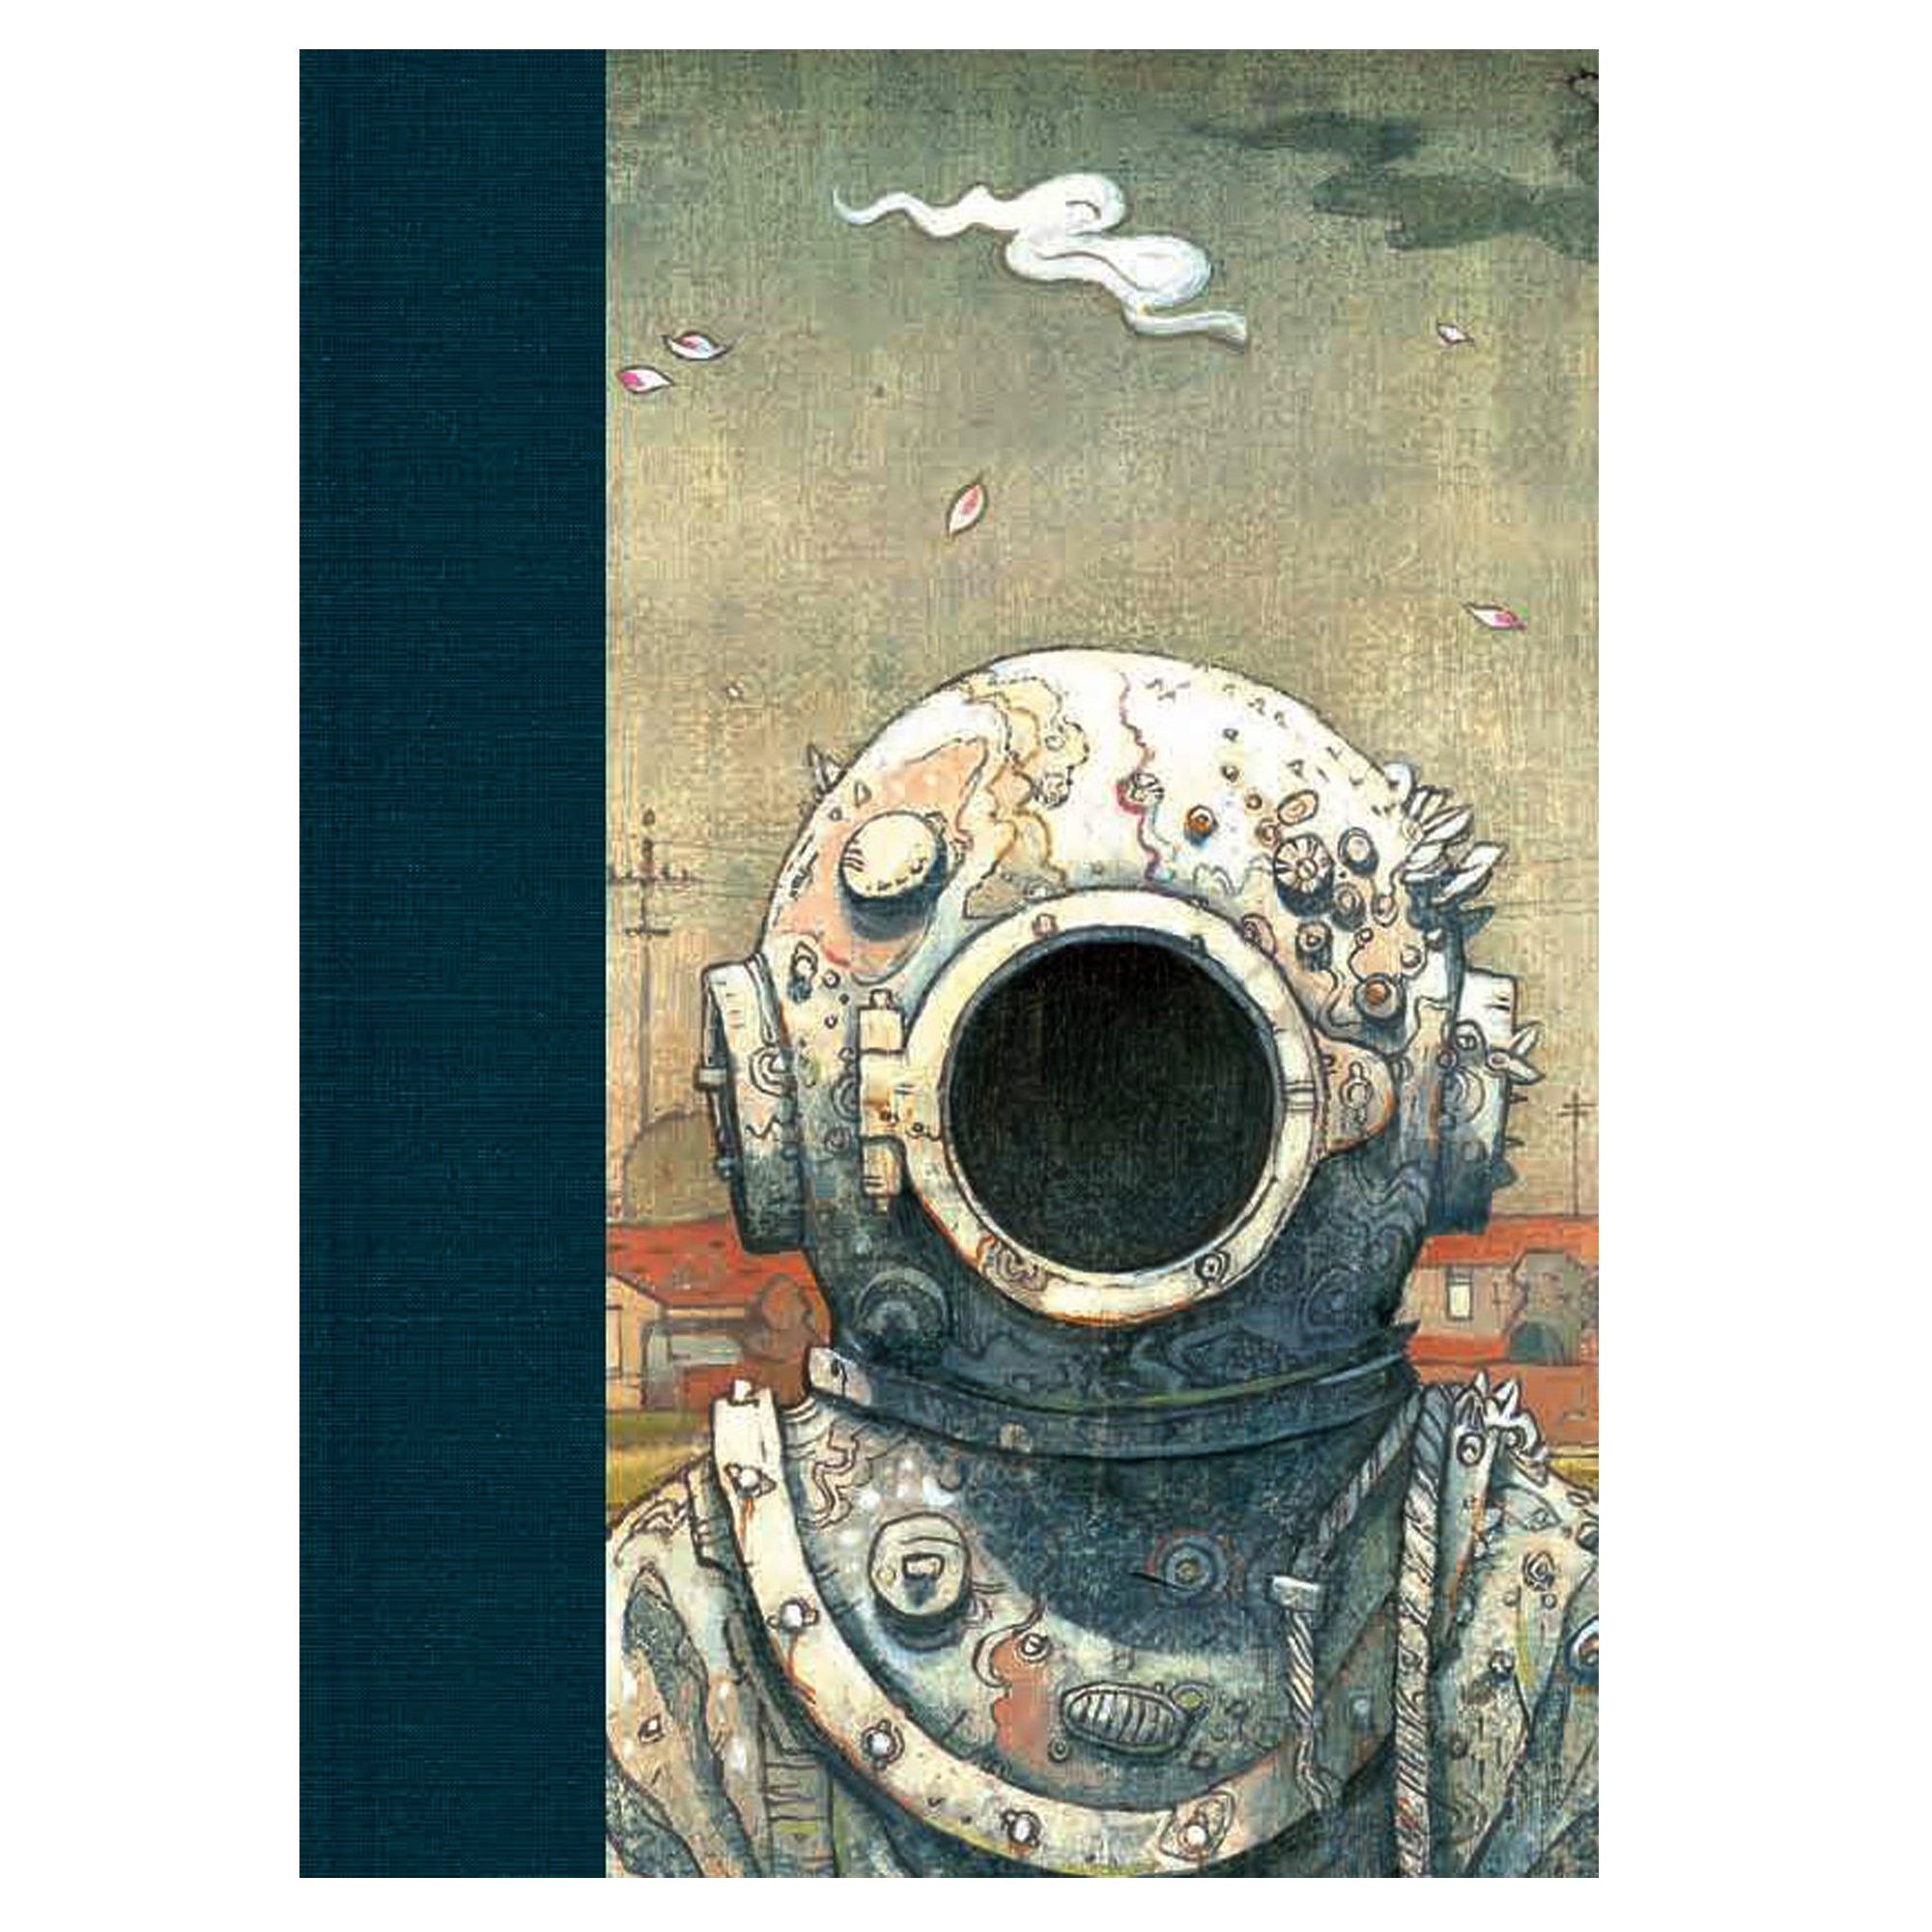 Shaun Tan - ' The Visitor' Blank Journal (m/nuo1)